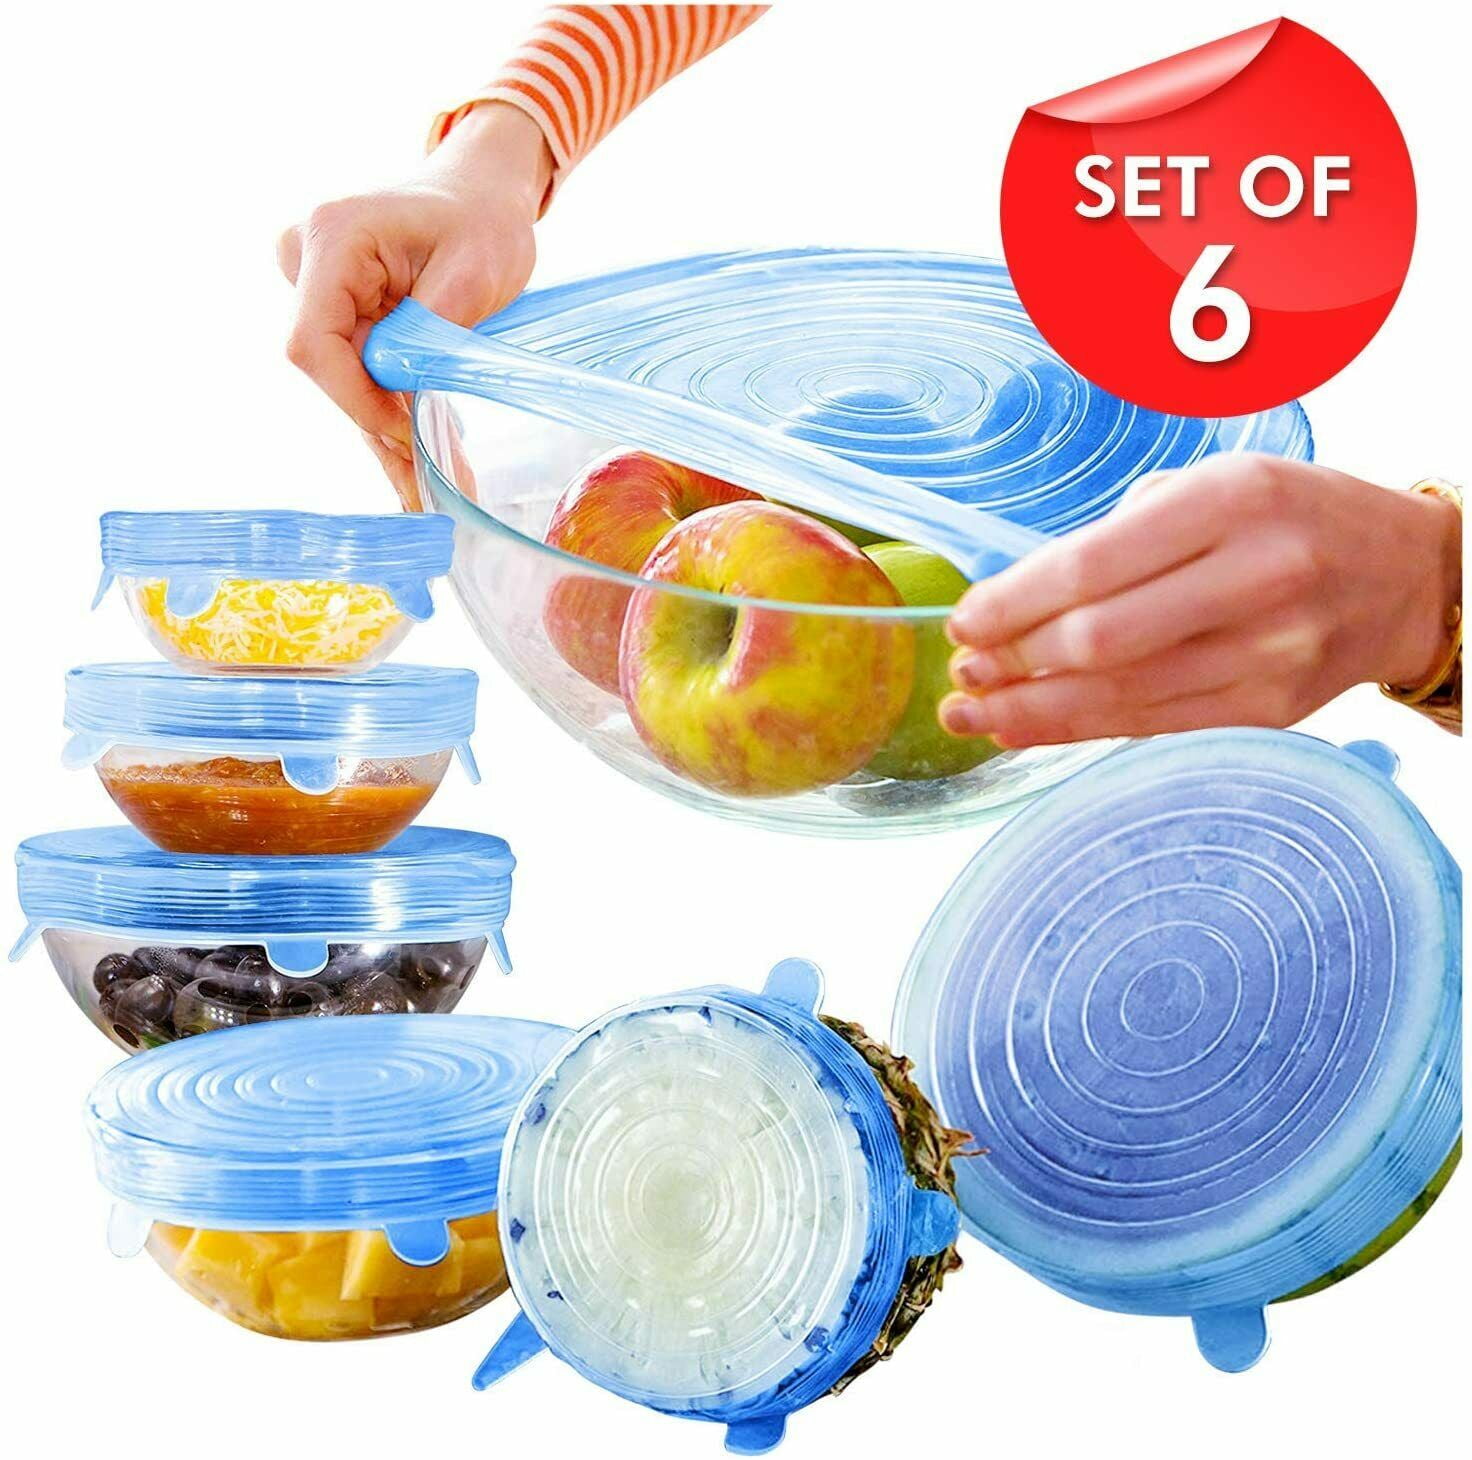 Joie Kitchen Gadgets Collapsible Silicone Muffin Tray